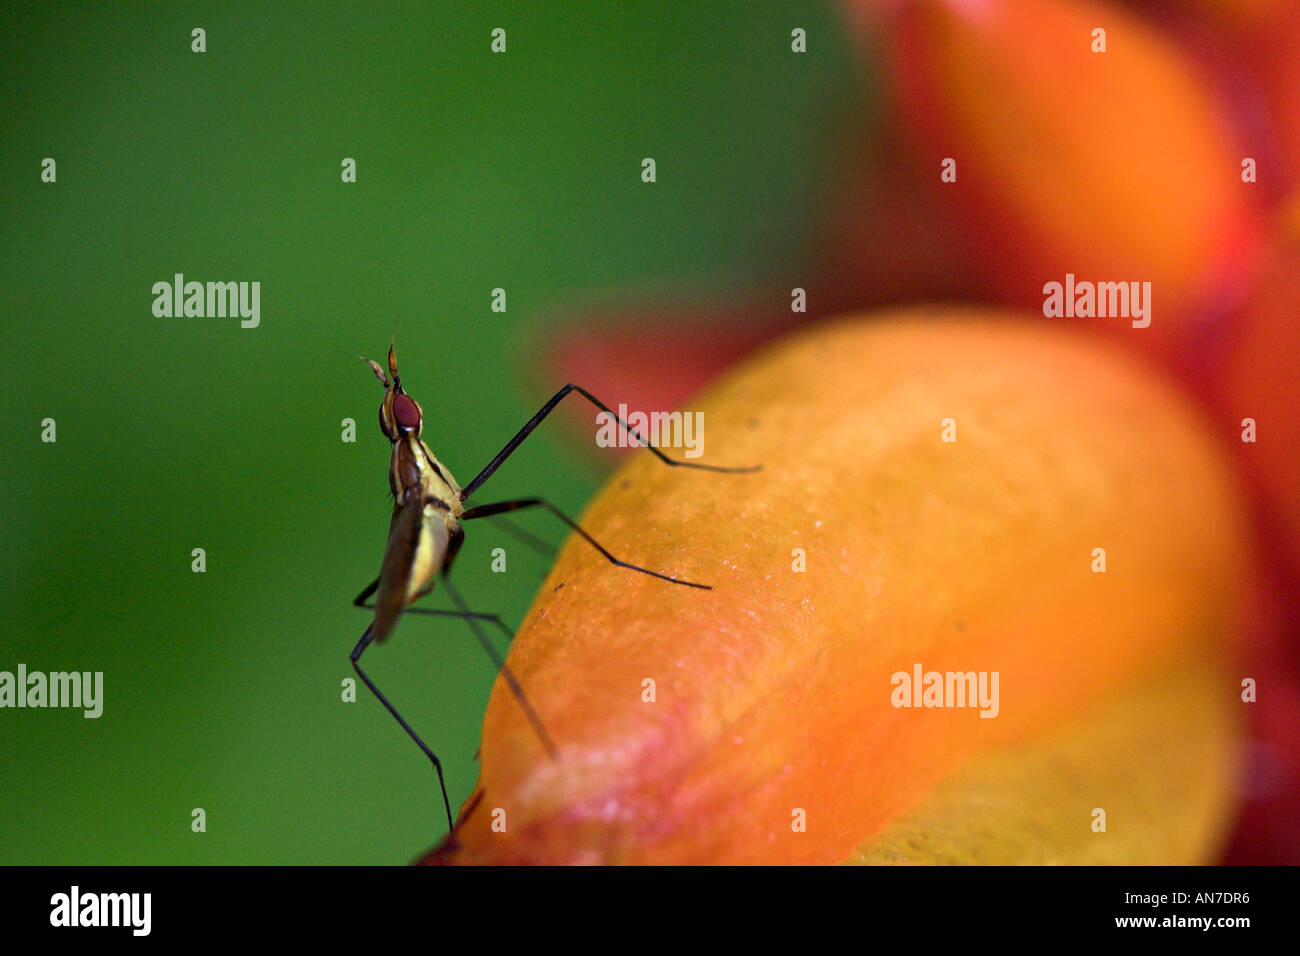 A small yellow and black insect walking over a large orange flower bud Stock Photo